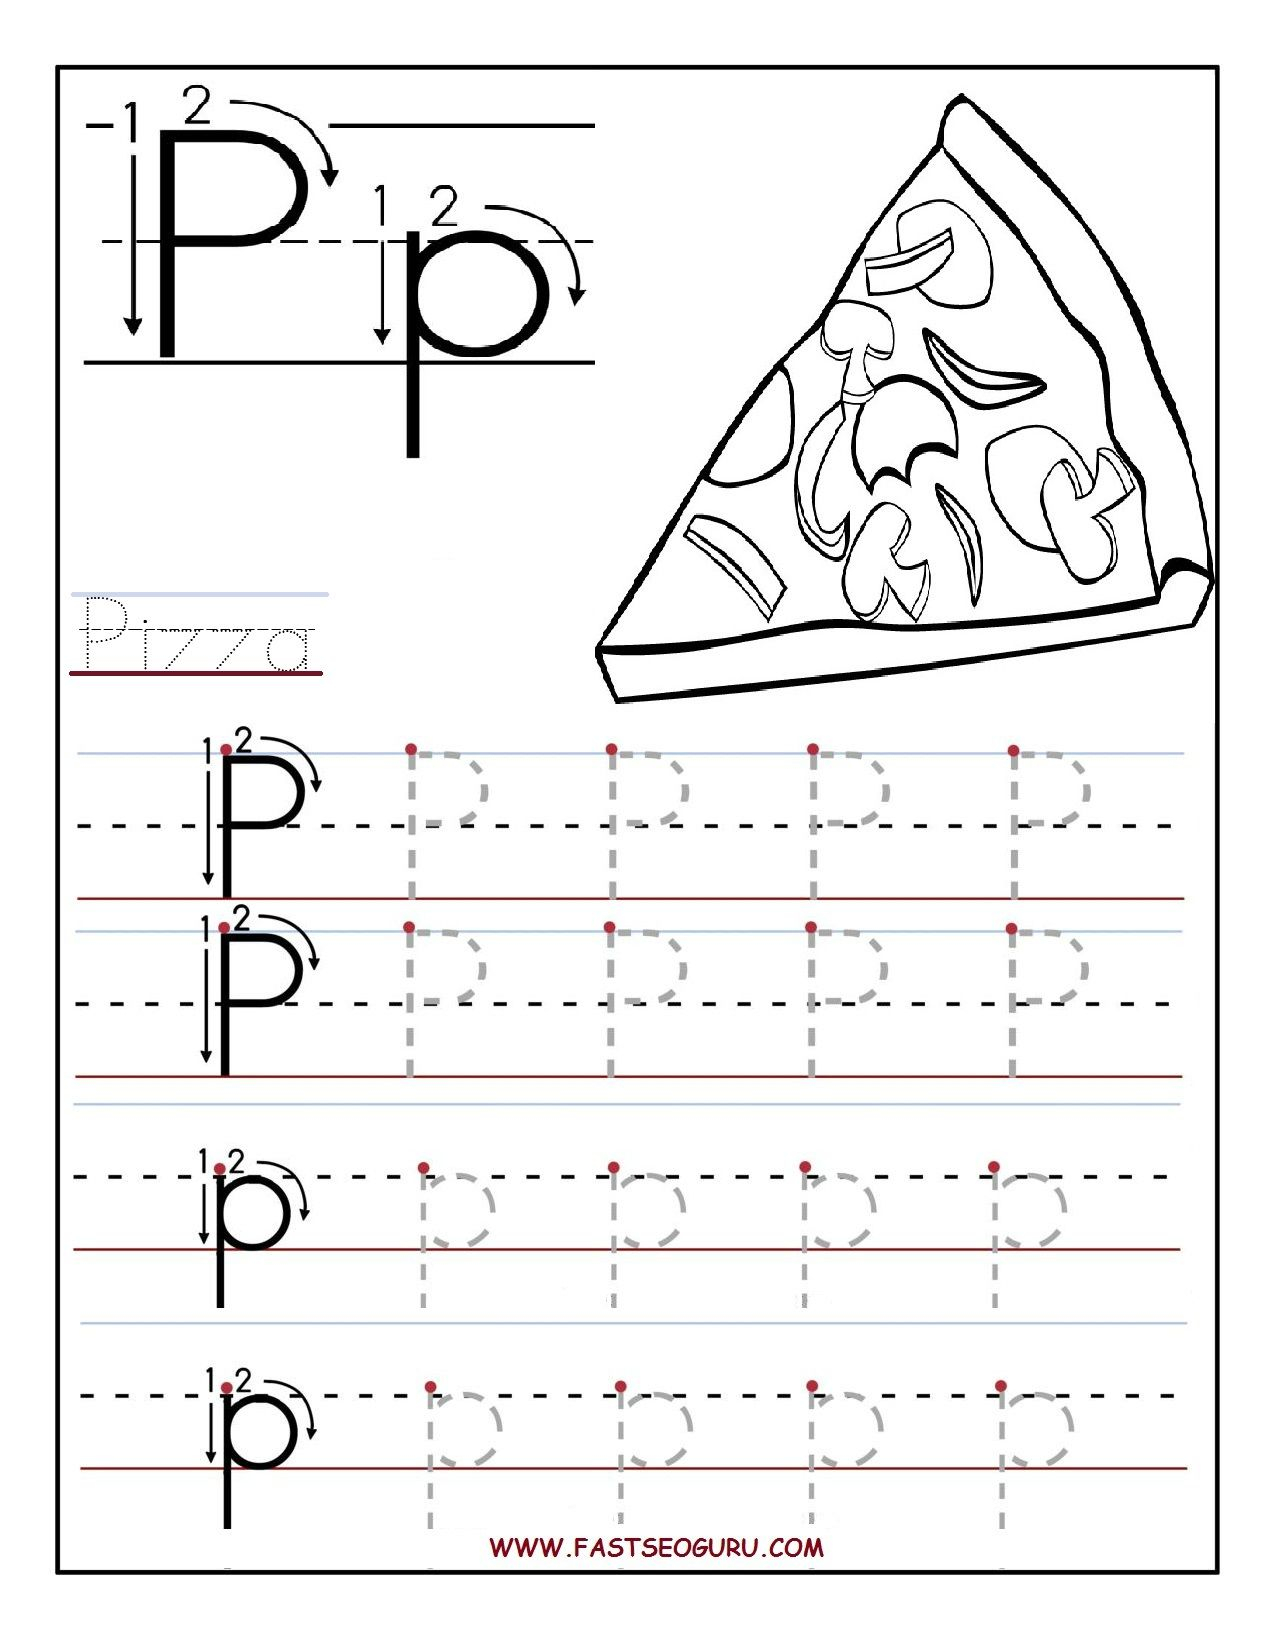 Printable Letter P Tracing Worksheets For Preschool for Letter P Tracing Worksheets For Preschool